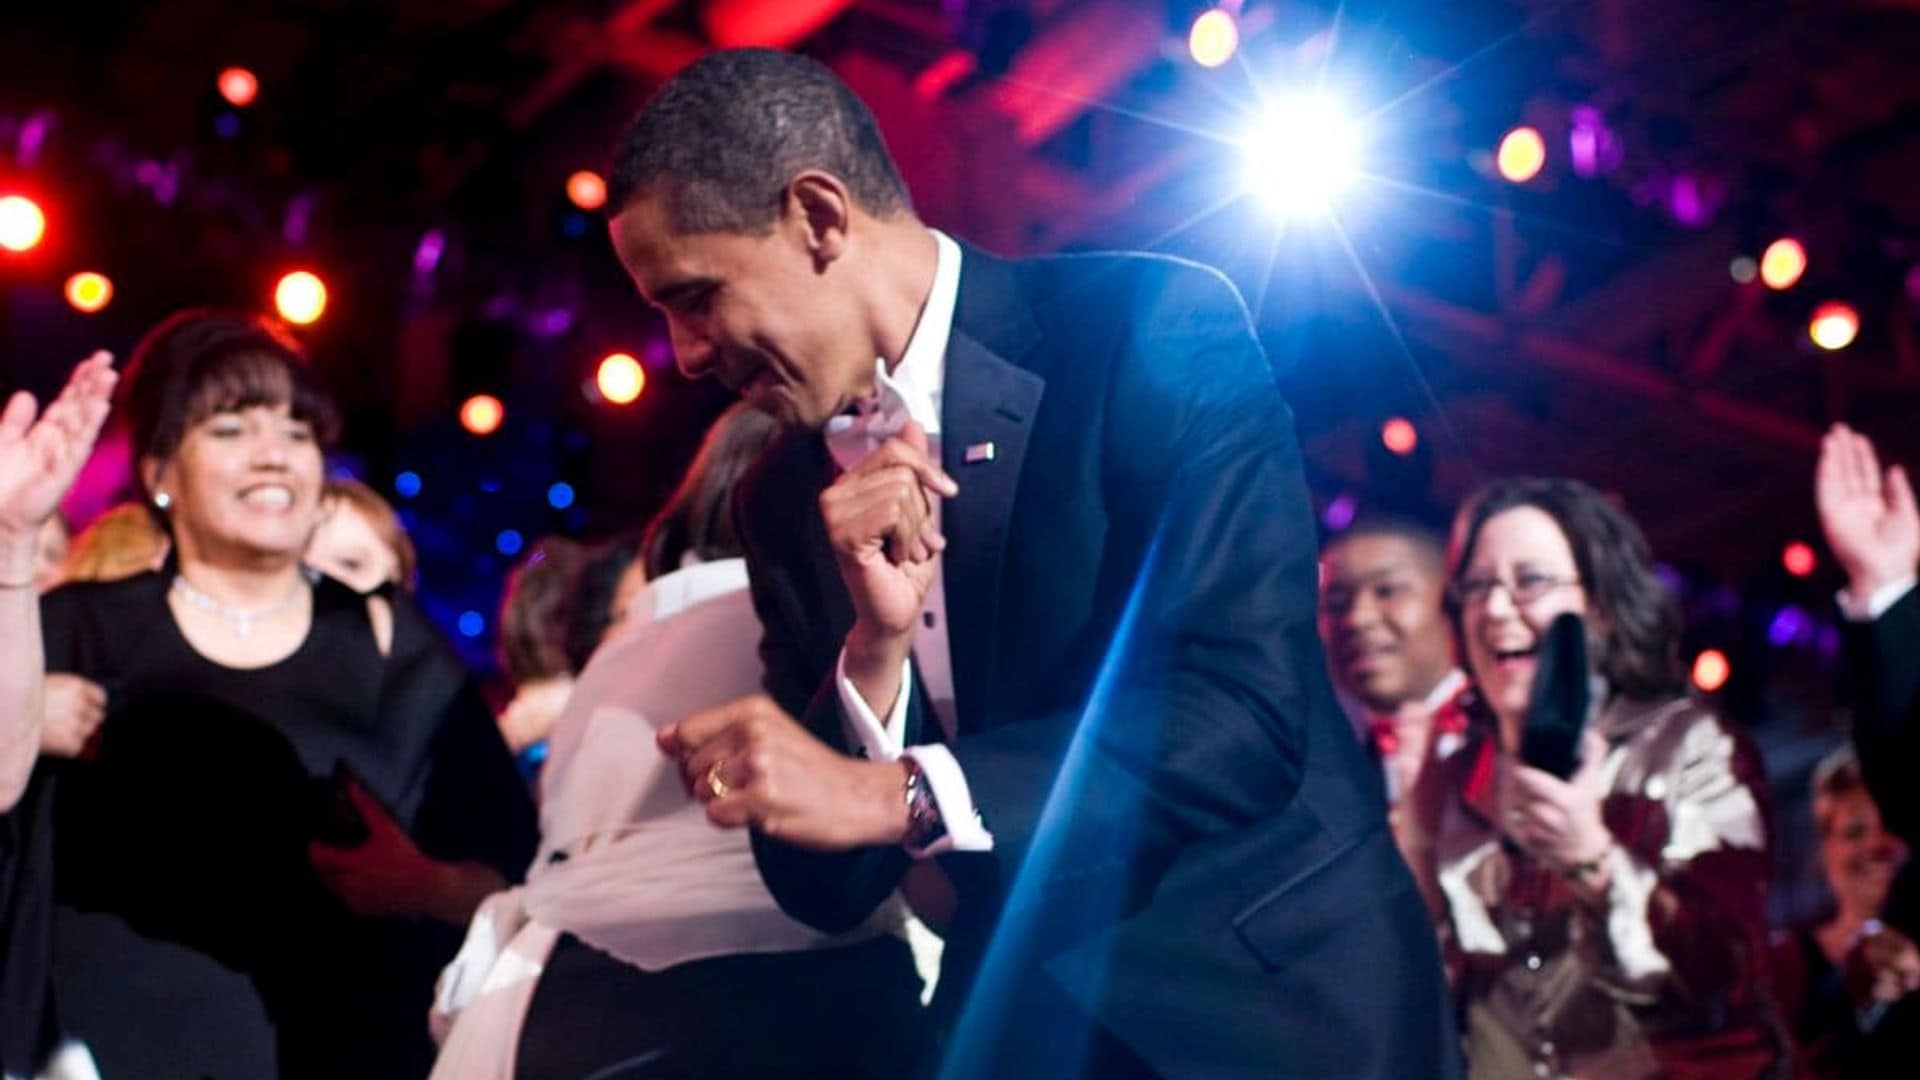 Former President Barack Obama is throwing a big party to celebrate his 60th birthday